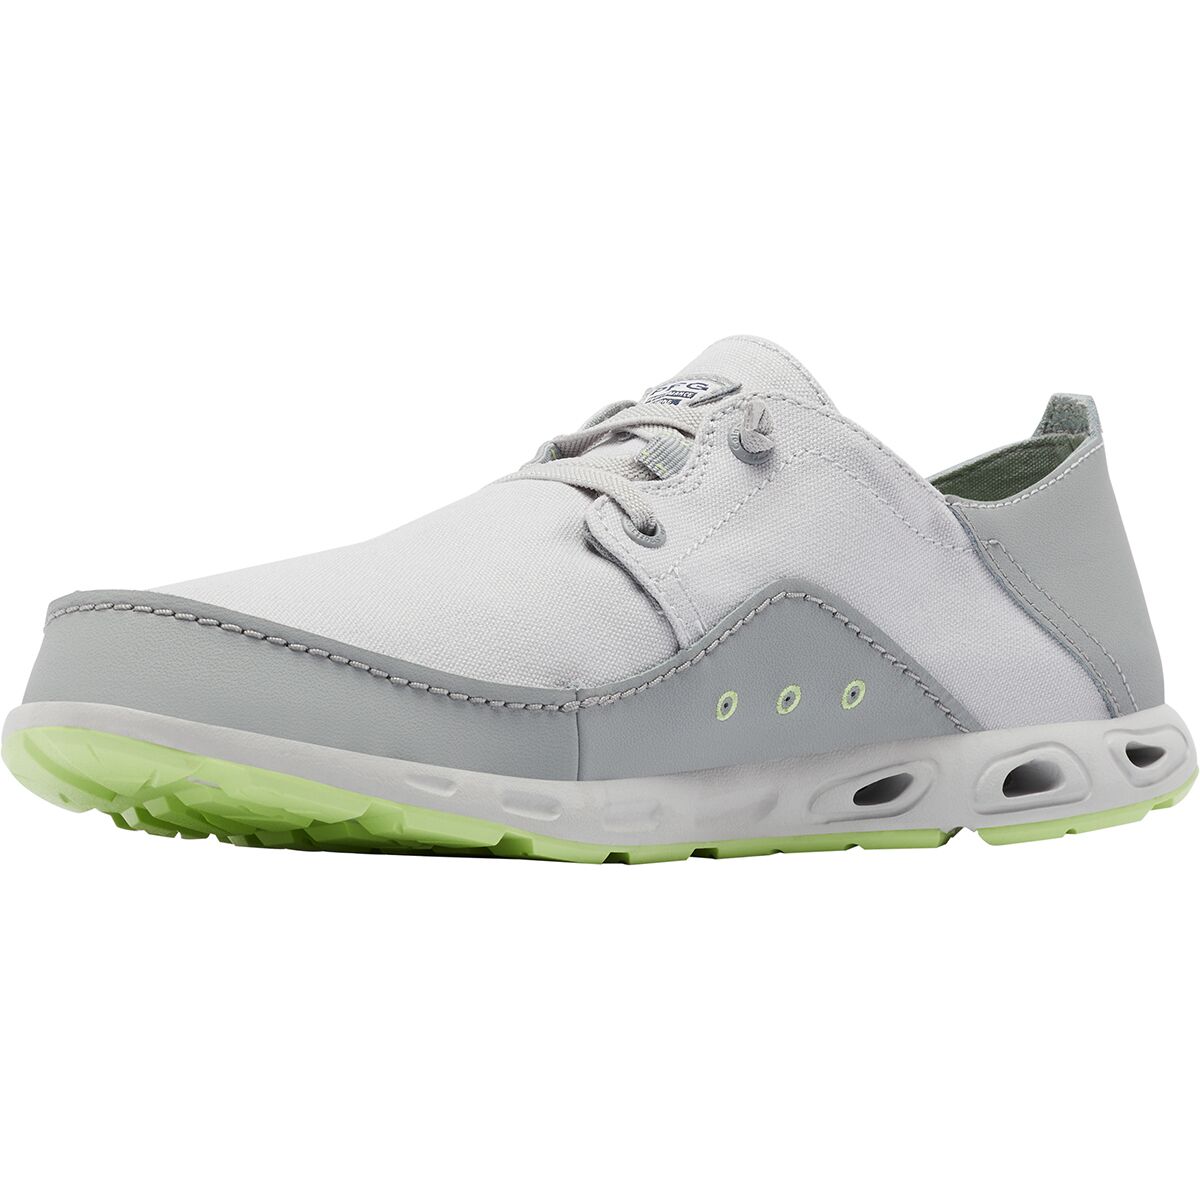 Columbia - Men's Casual Fashion Shoes and Sneakers